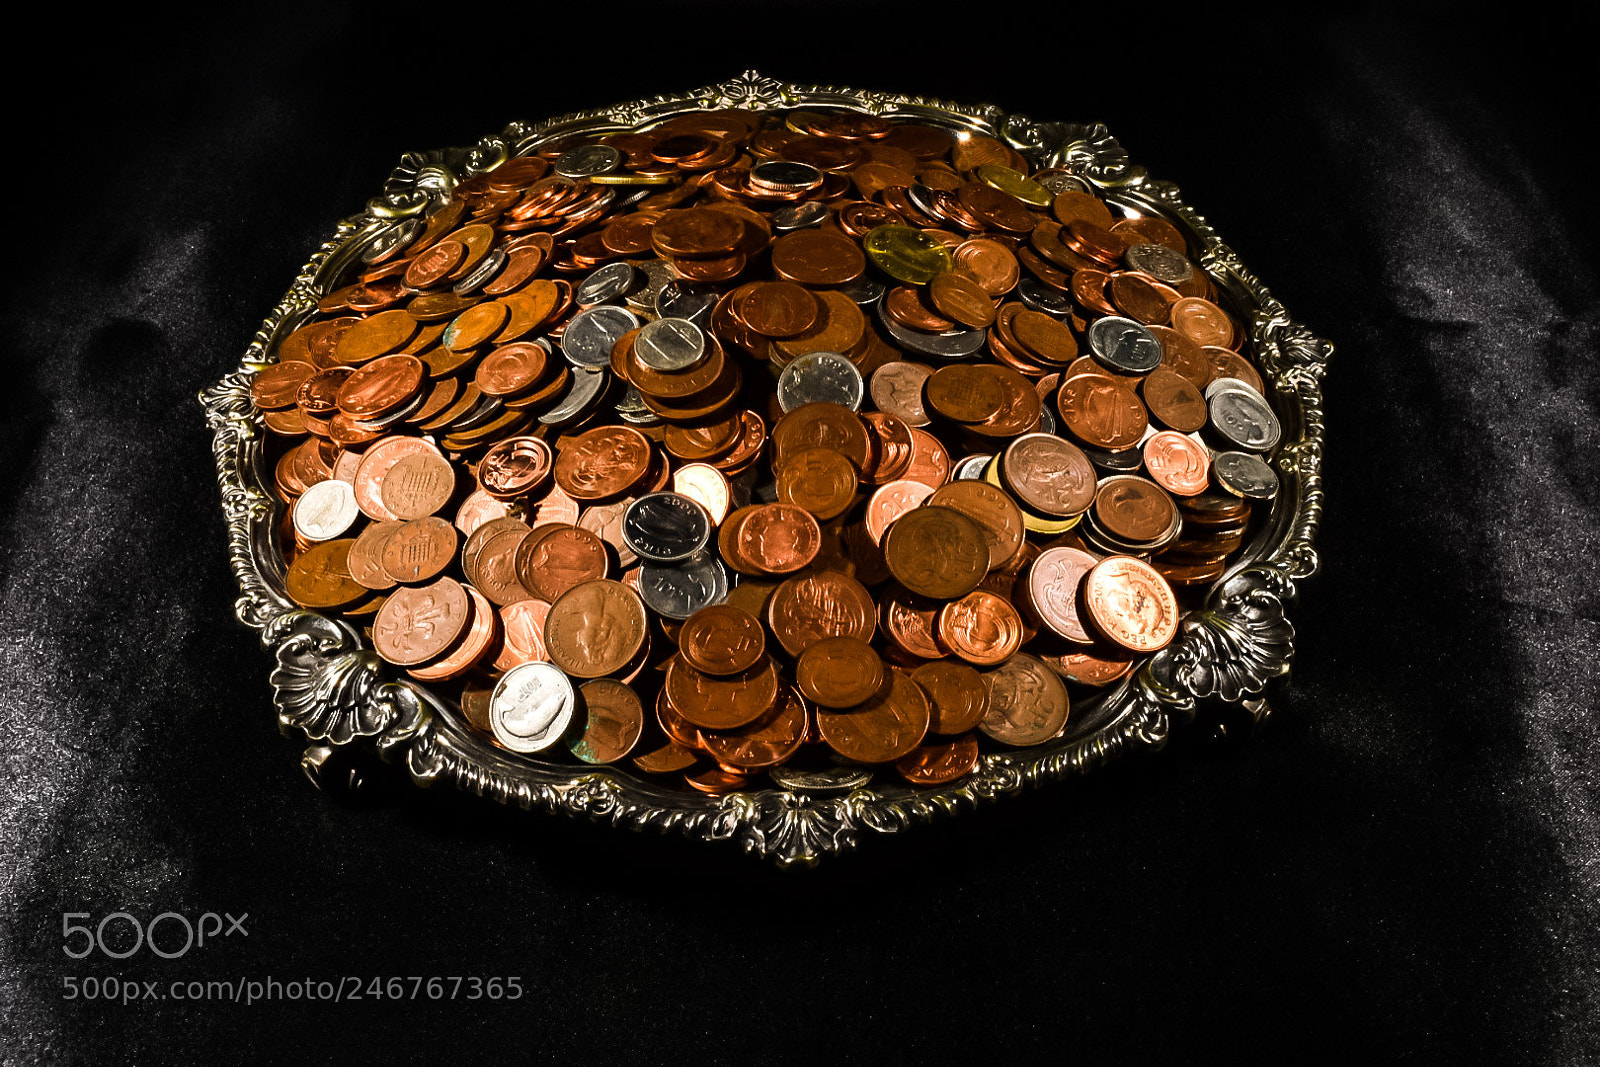 Nikon D5300 sample photo. Penny's on silver plate photography